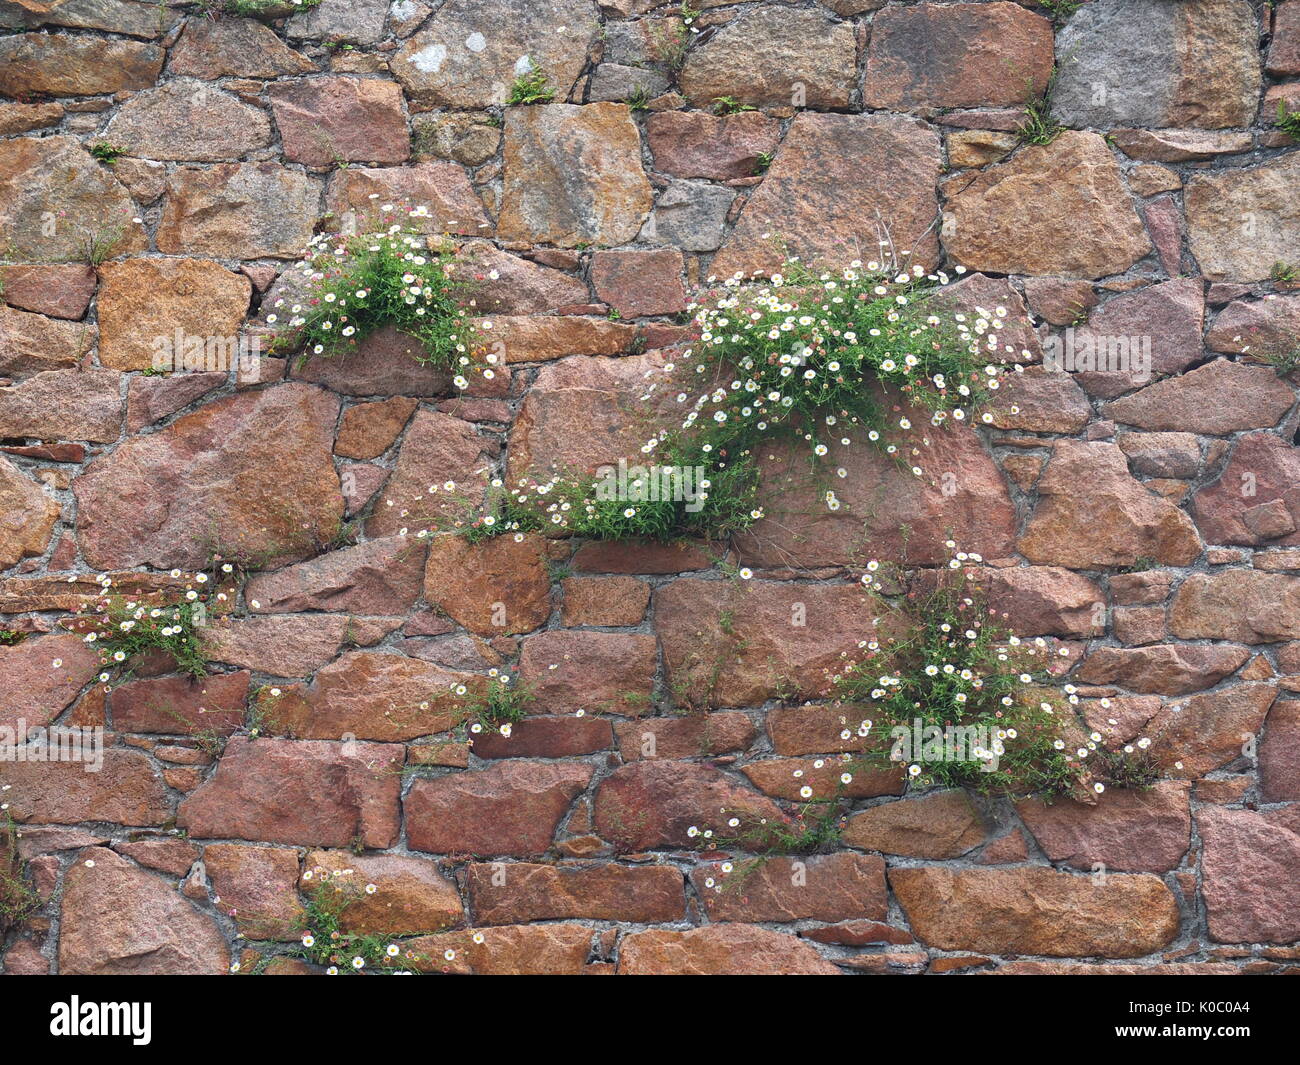 Clumps of Mexican Fleabane (Erigeron Karvinskianus) growing out of a granite wall on the island of Jersey Stock Photo